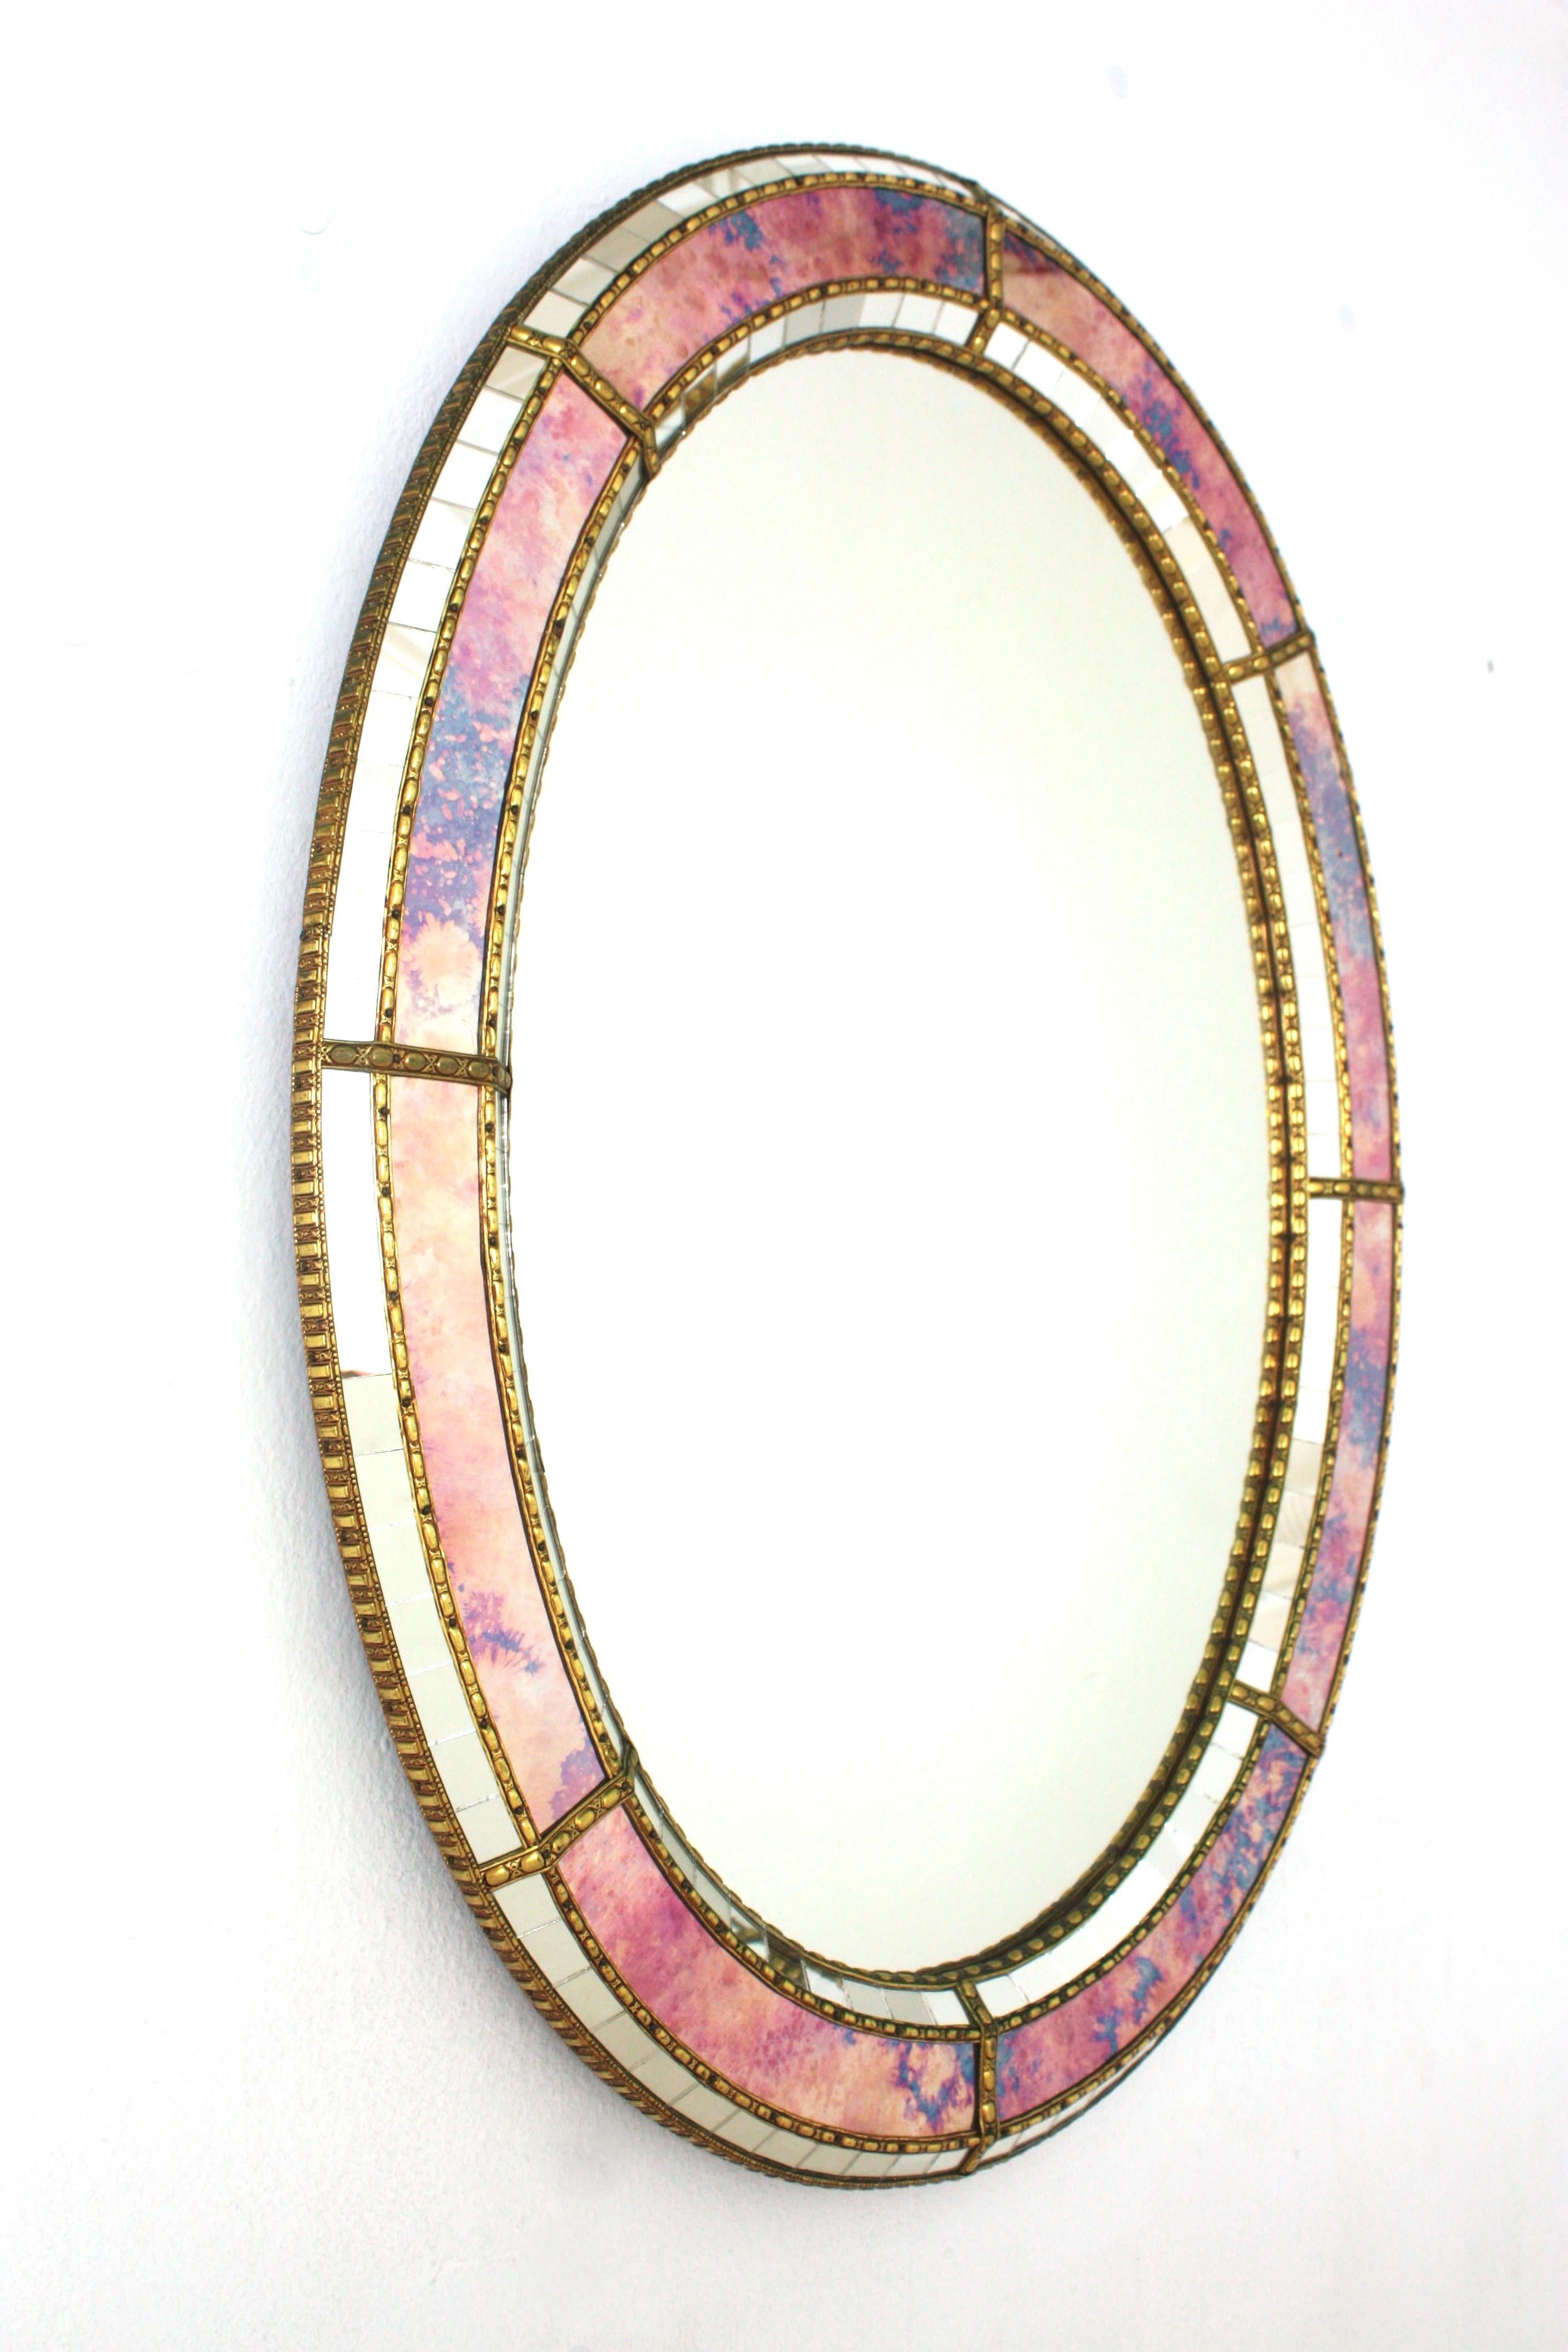 Spanish Oval Venetian Style Mirror with Pink Purple Glass and Brass Details